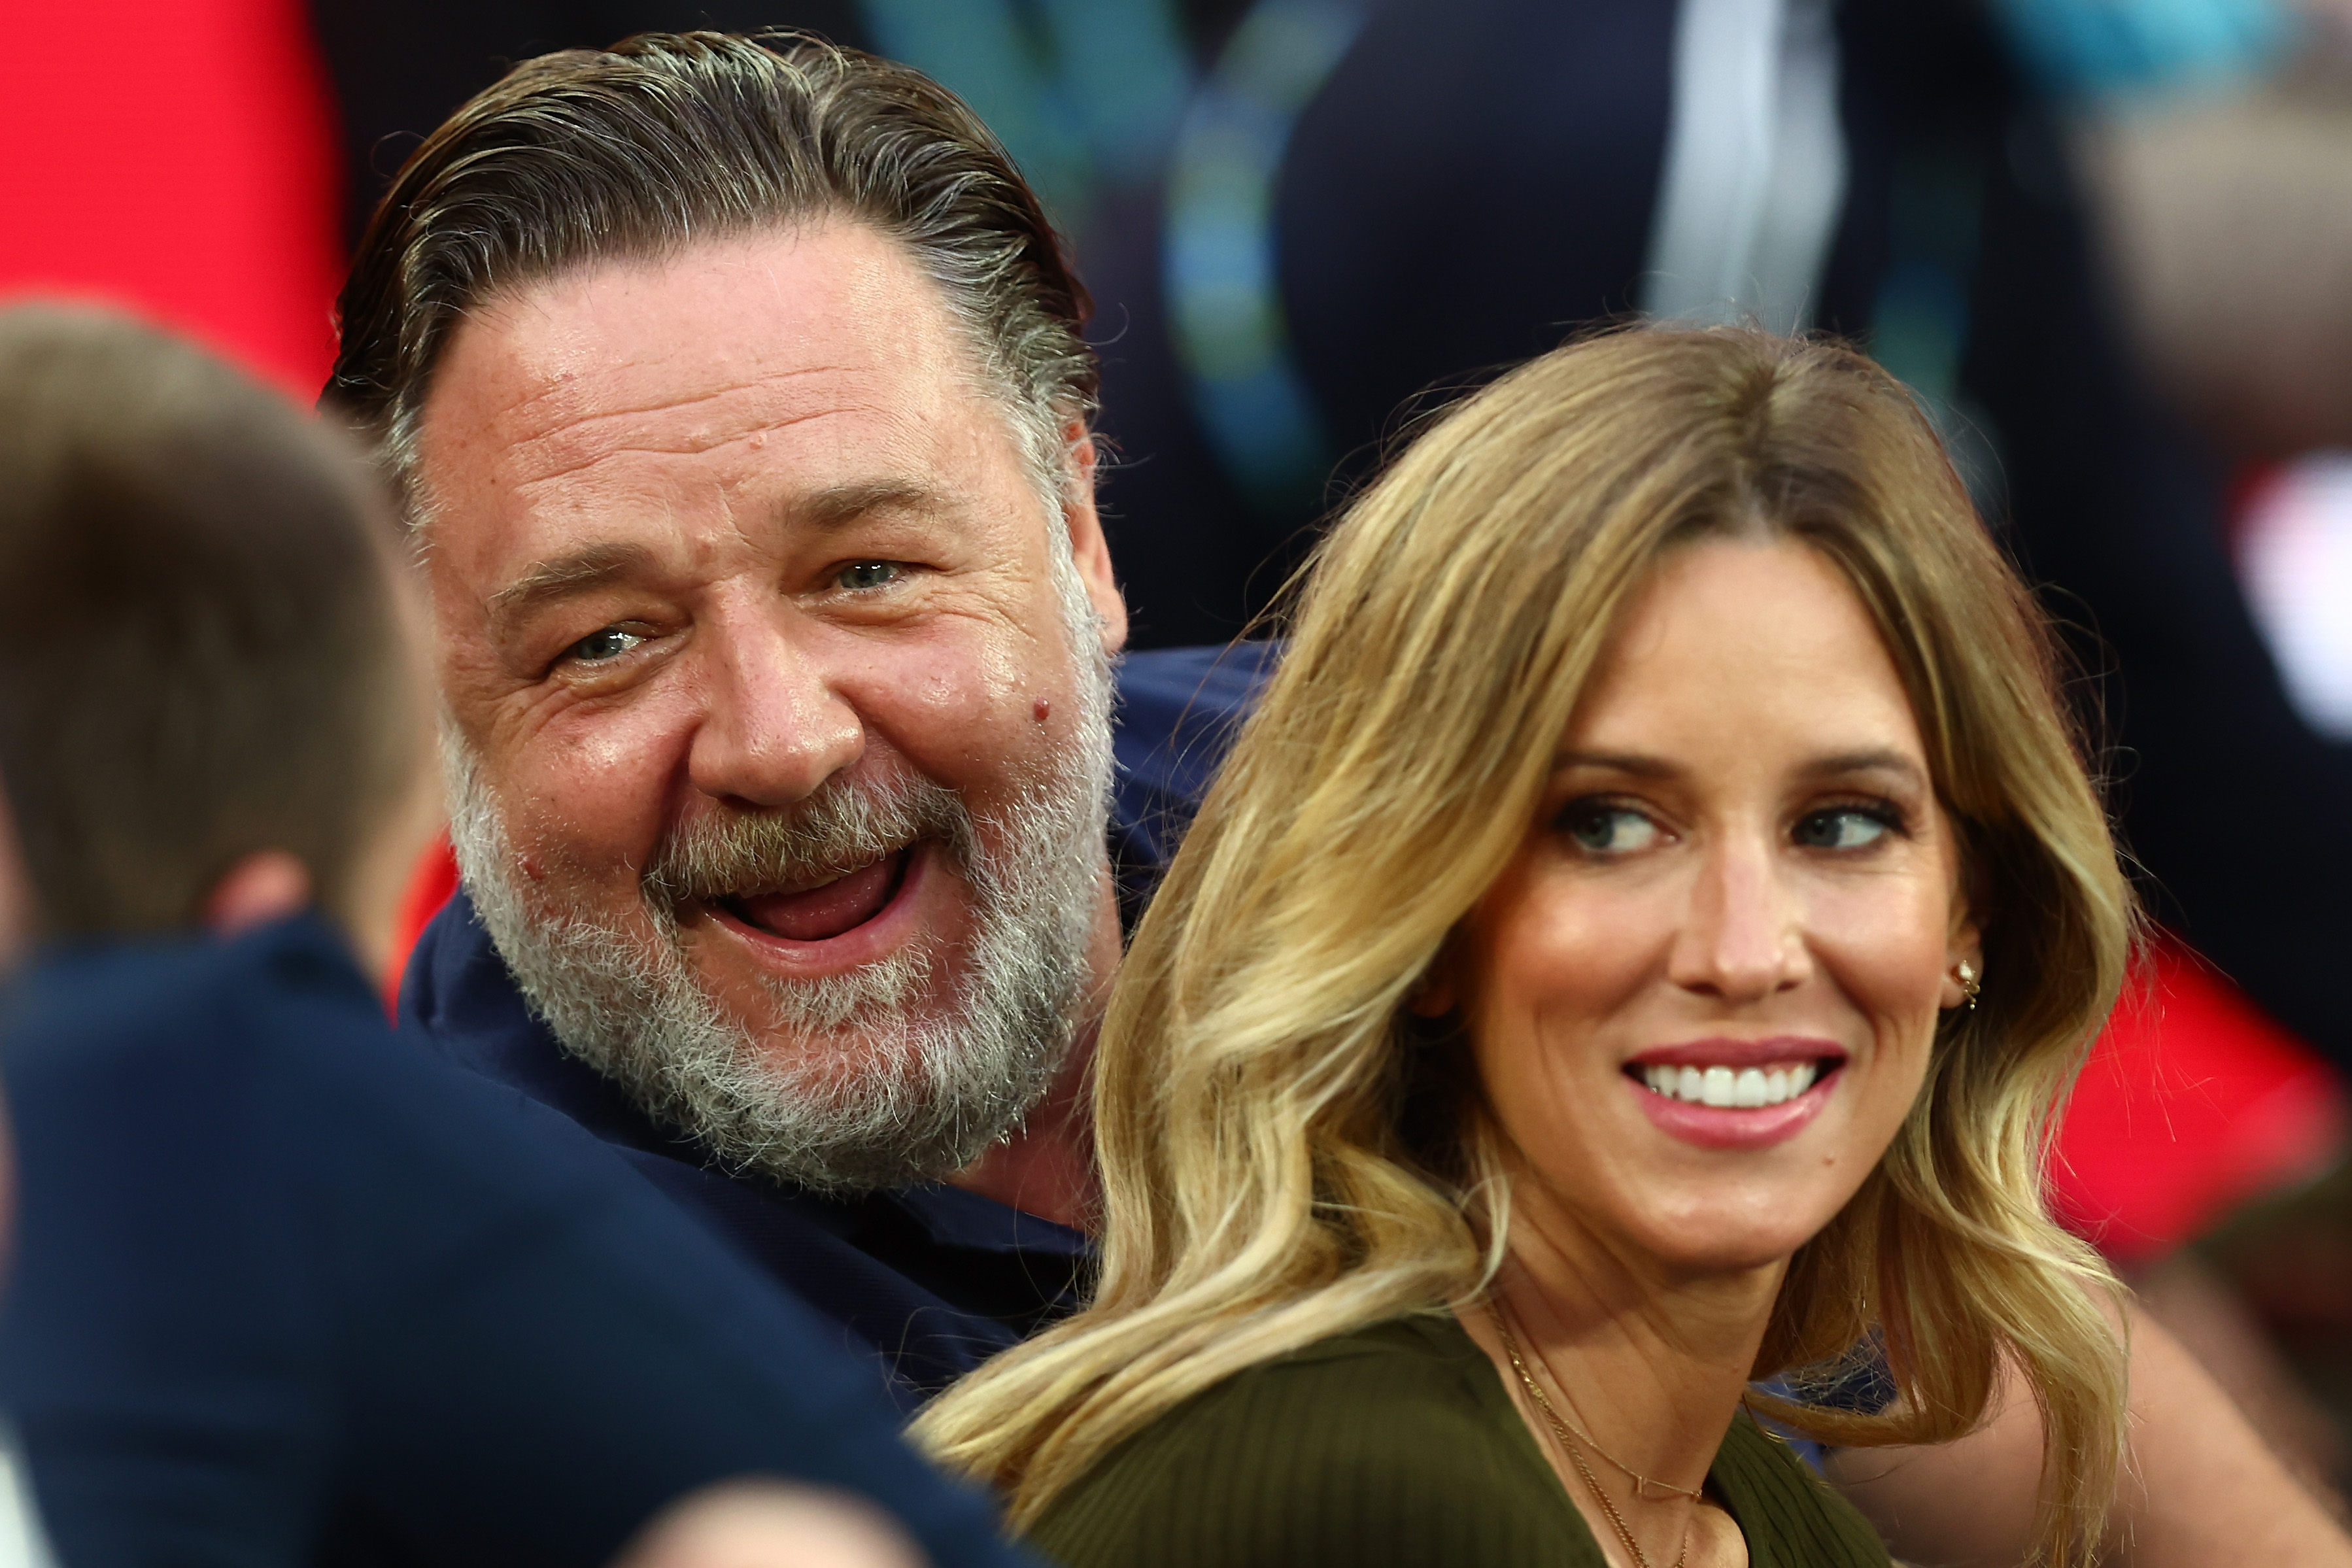 <p>Oscar winner Russell Crowe and actress-turned-real estate agent Britney Theriot attended the Australian Open Women's Singles Final in Melbourne, Australia, in January 2022. The couple were <a href="https://www.wonderwall.com/celebrity/couples/chrishell-stause-accused-of-cheating-with-married-dwts-partner-gleb-savchenko-more-celeb-love-news-romance-report-400809.gallery?photoId=400885">first romantically linked in the fall of 2020</a> when Russell was 56 and media outlets reported that Britney was 30. However, in October 2022, Russell took to Twitter to hit back at the age gap reports, revealing he's not 26 or 27 years Britney's senior as has been reported, but closer to 19 years older. "Far be it for me to promote this sort of vacuous malarkey posited as some kind of news," he tweeted, "but…without being unchivalrous and with her express permission, Britney is 39 years old."</p>